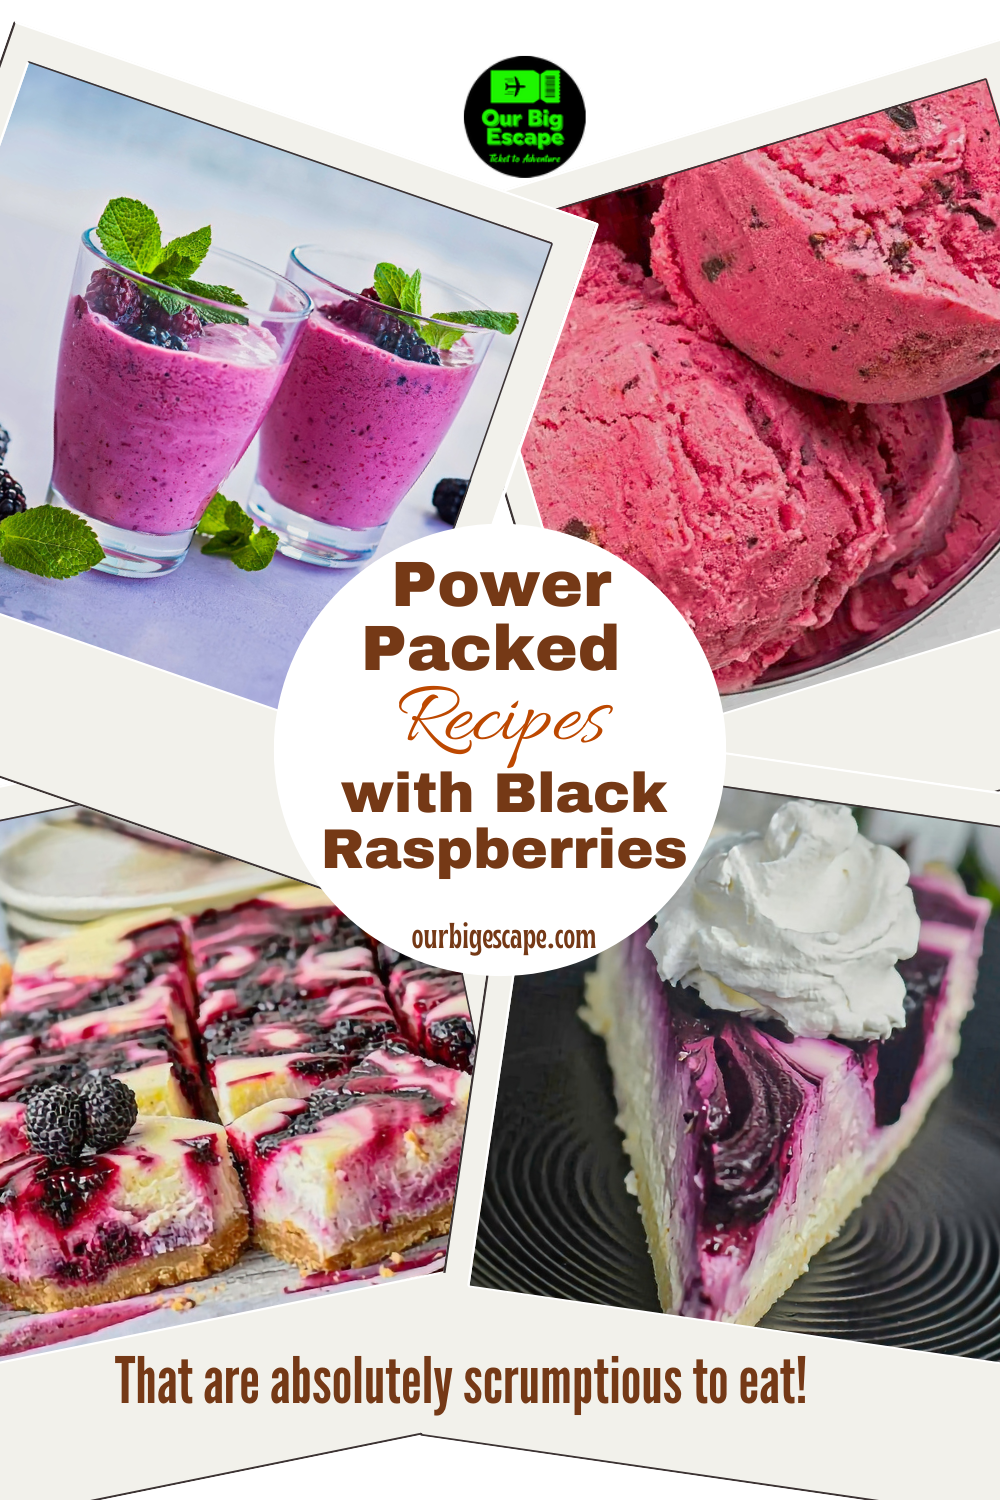 Power Packed Recipes with Black Raspberries